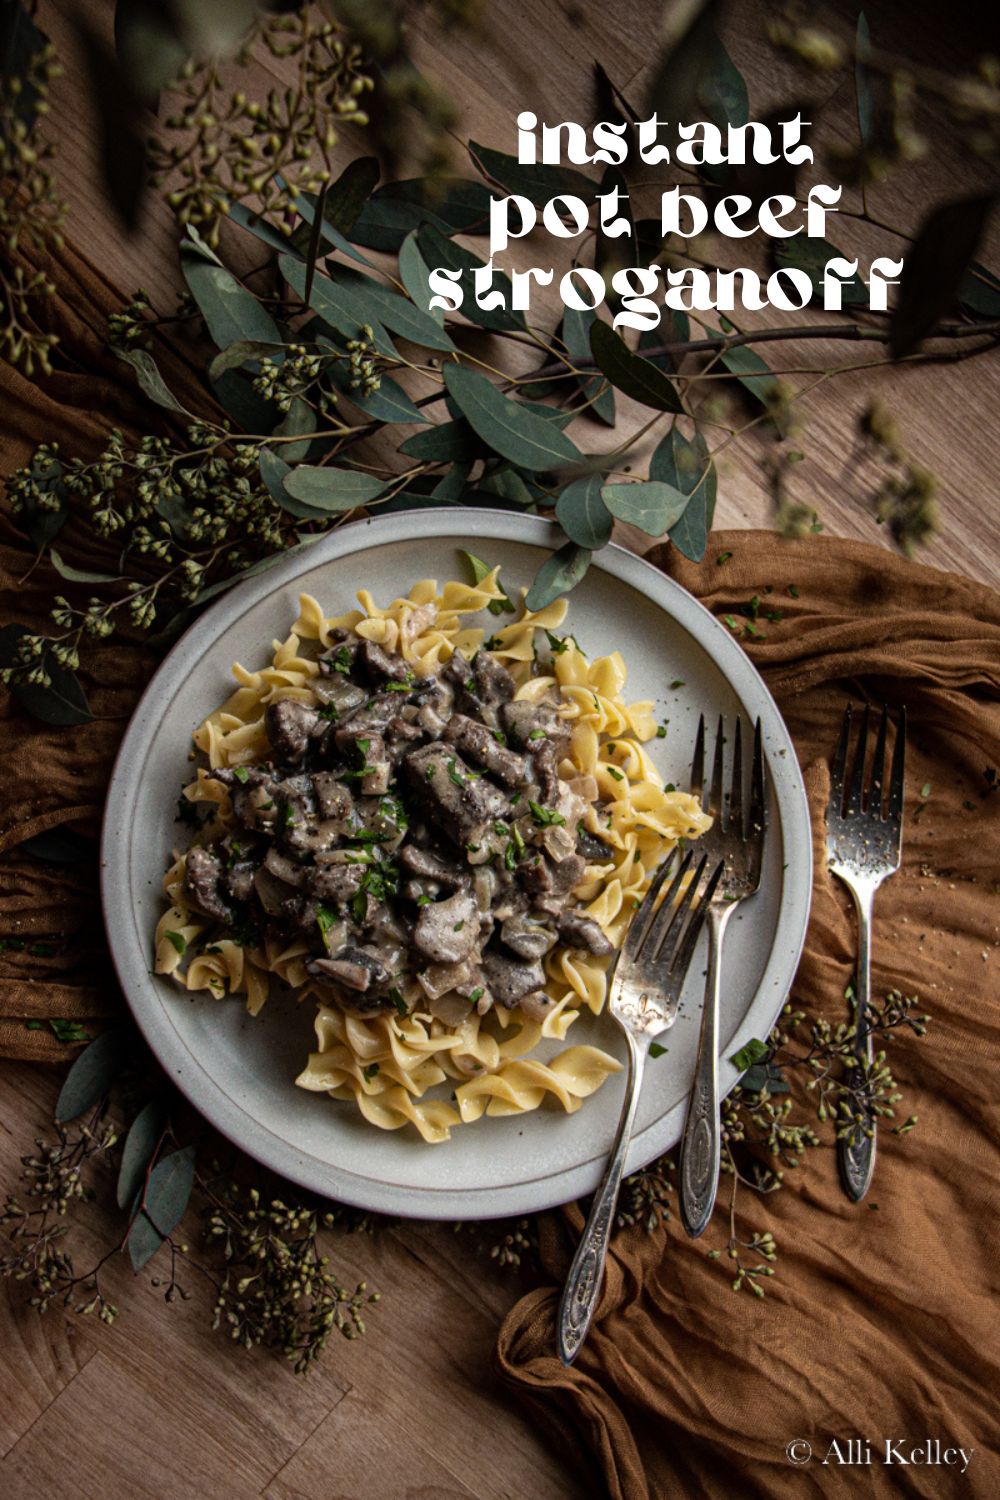 Stroganoff is one of those comfort dishes that everyone can enjoy and you can enjoy it even more with this Instant Pot beef stroganoff recipe. It’s an easy one pot recipe perfect for a fast dinner.